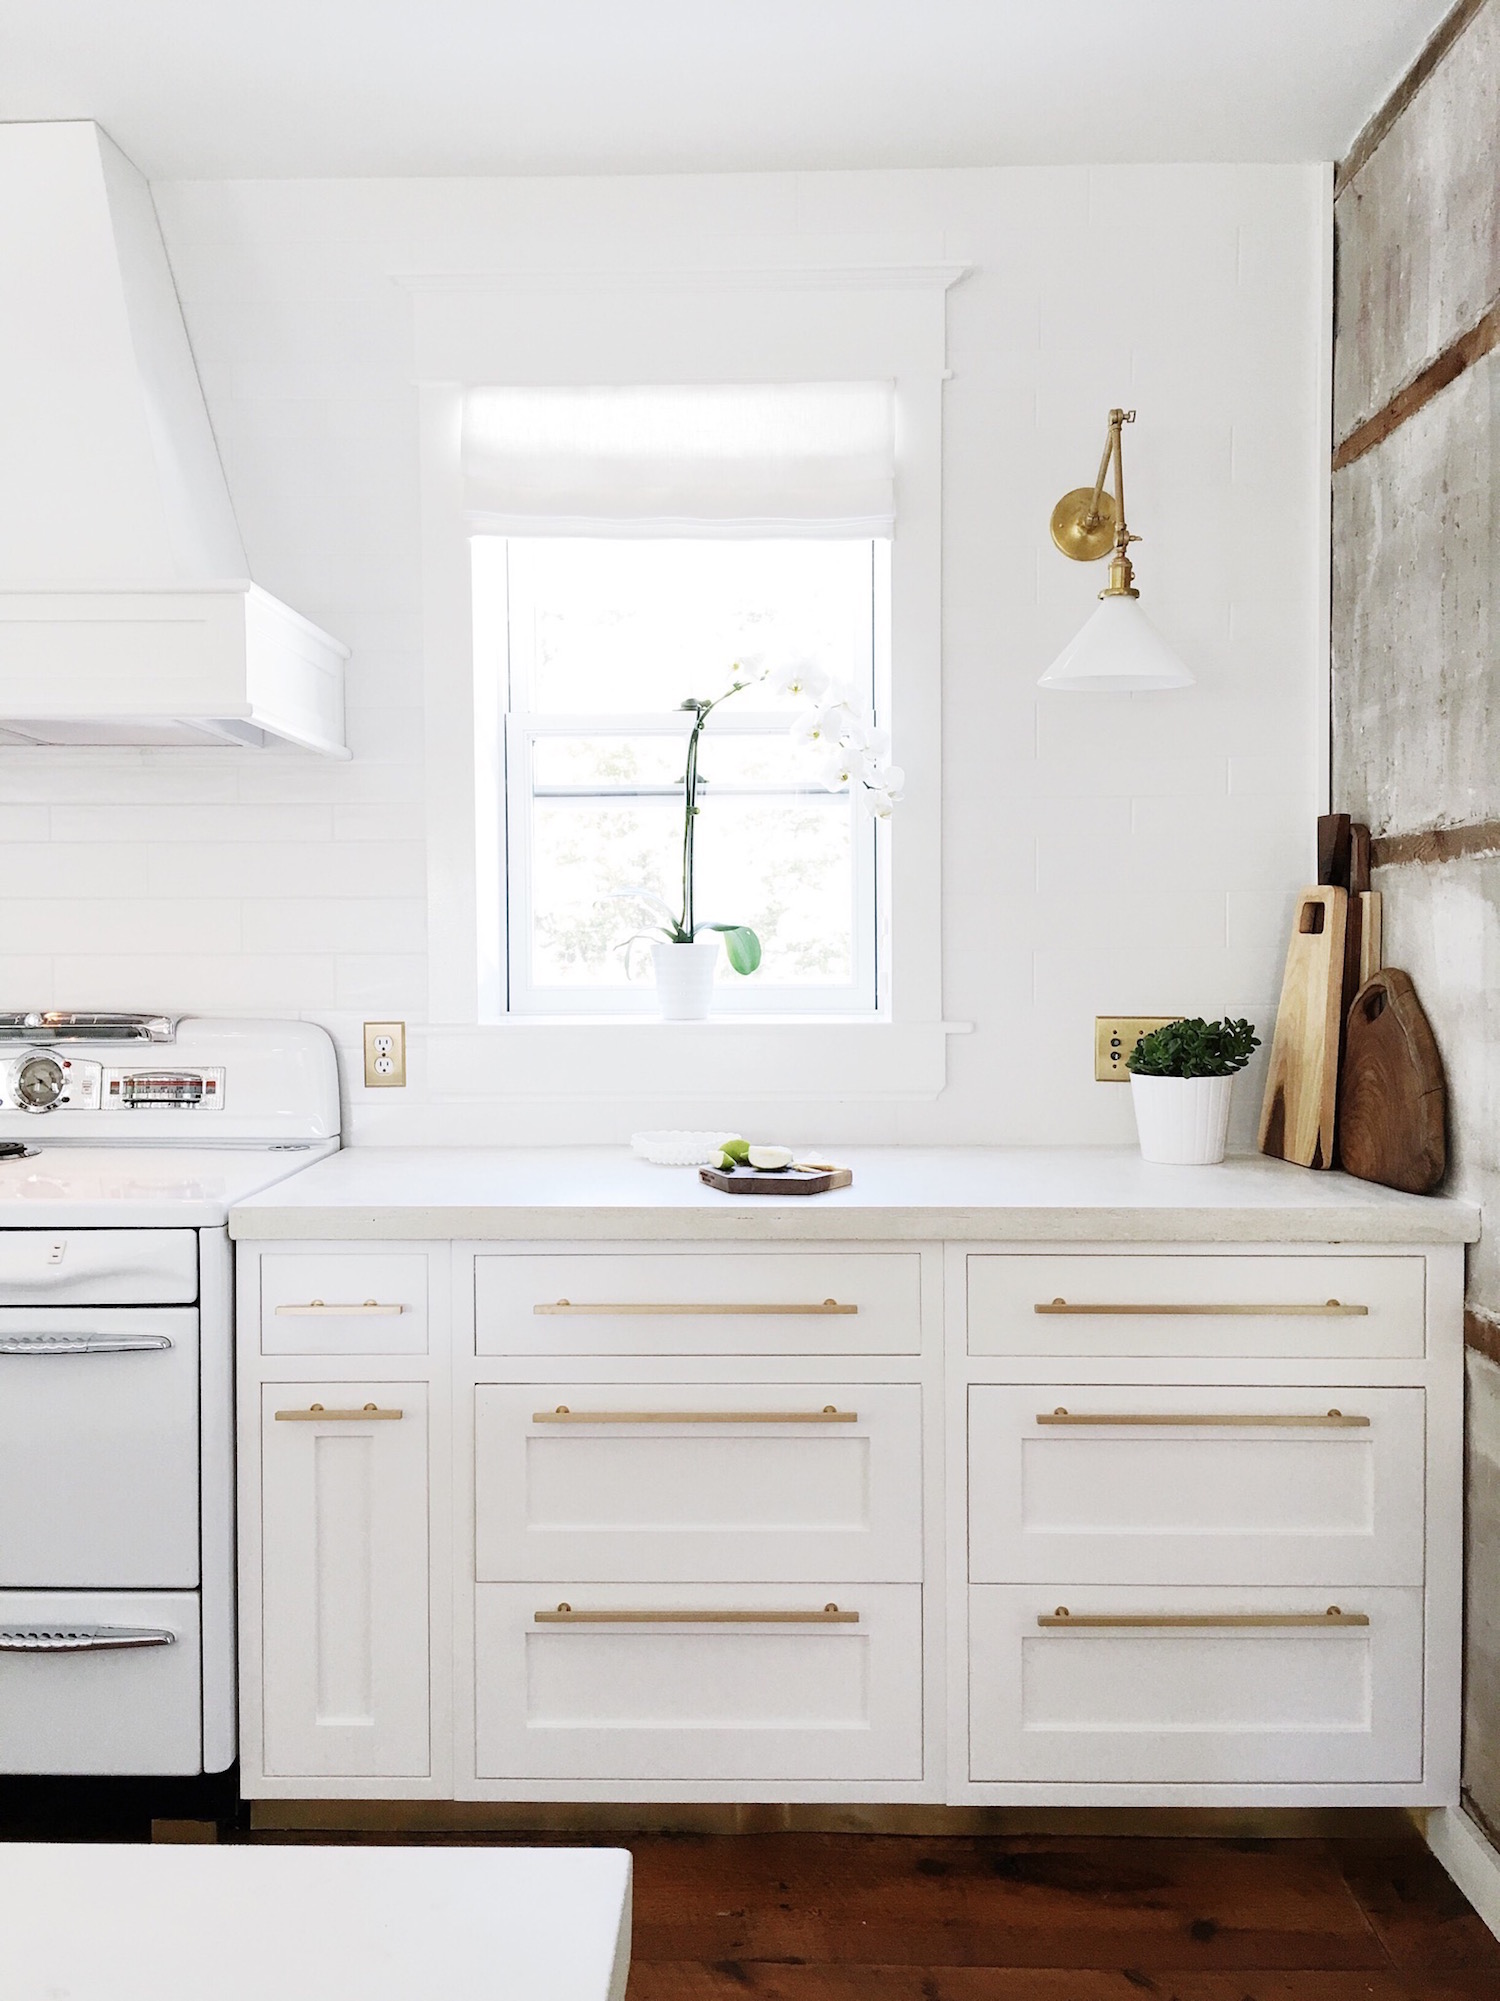 Before and after photos of an ahhhmazing kitchen renovation via @lynneknowlton | DESIGN THE LIFE YOU WANT TO LIVE. Enter the contest for a chance to win a champagne bronze faucet from @DeltaFaucetCan https://lynneknowlton.com/giveaways/faucet/